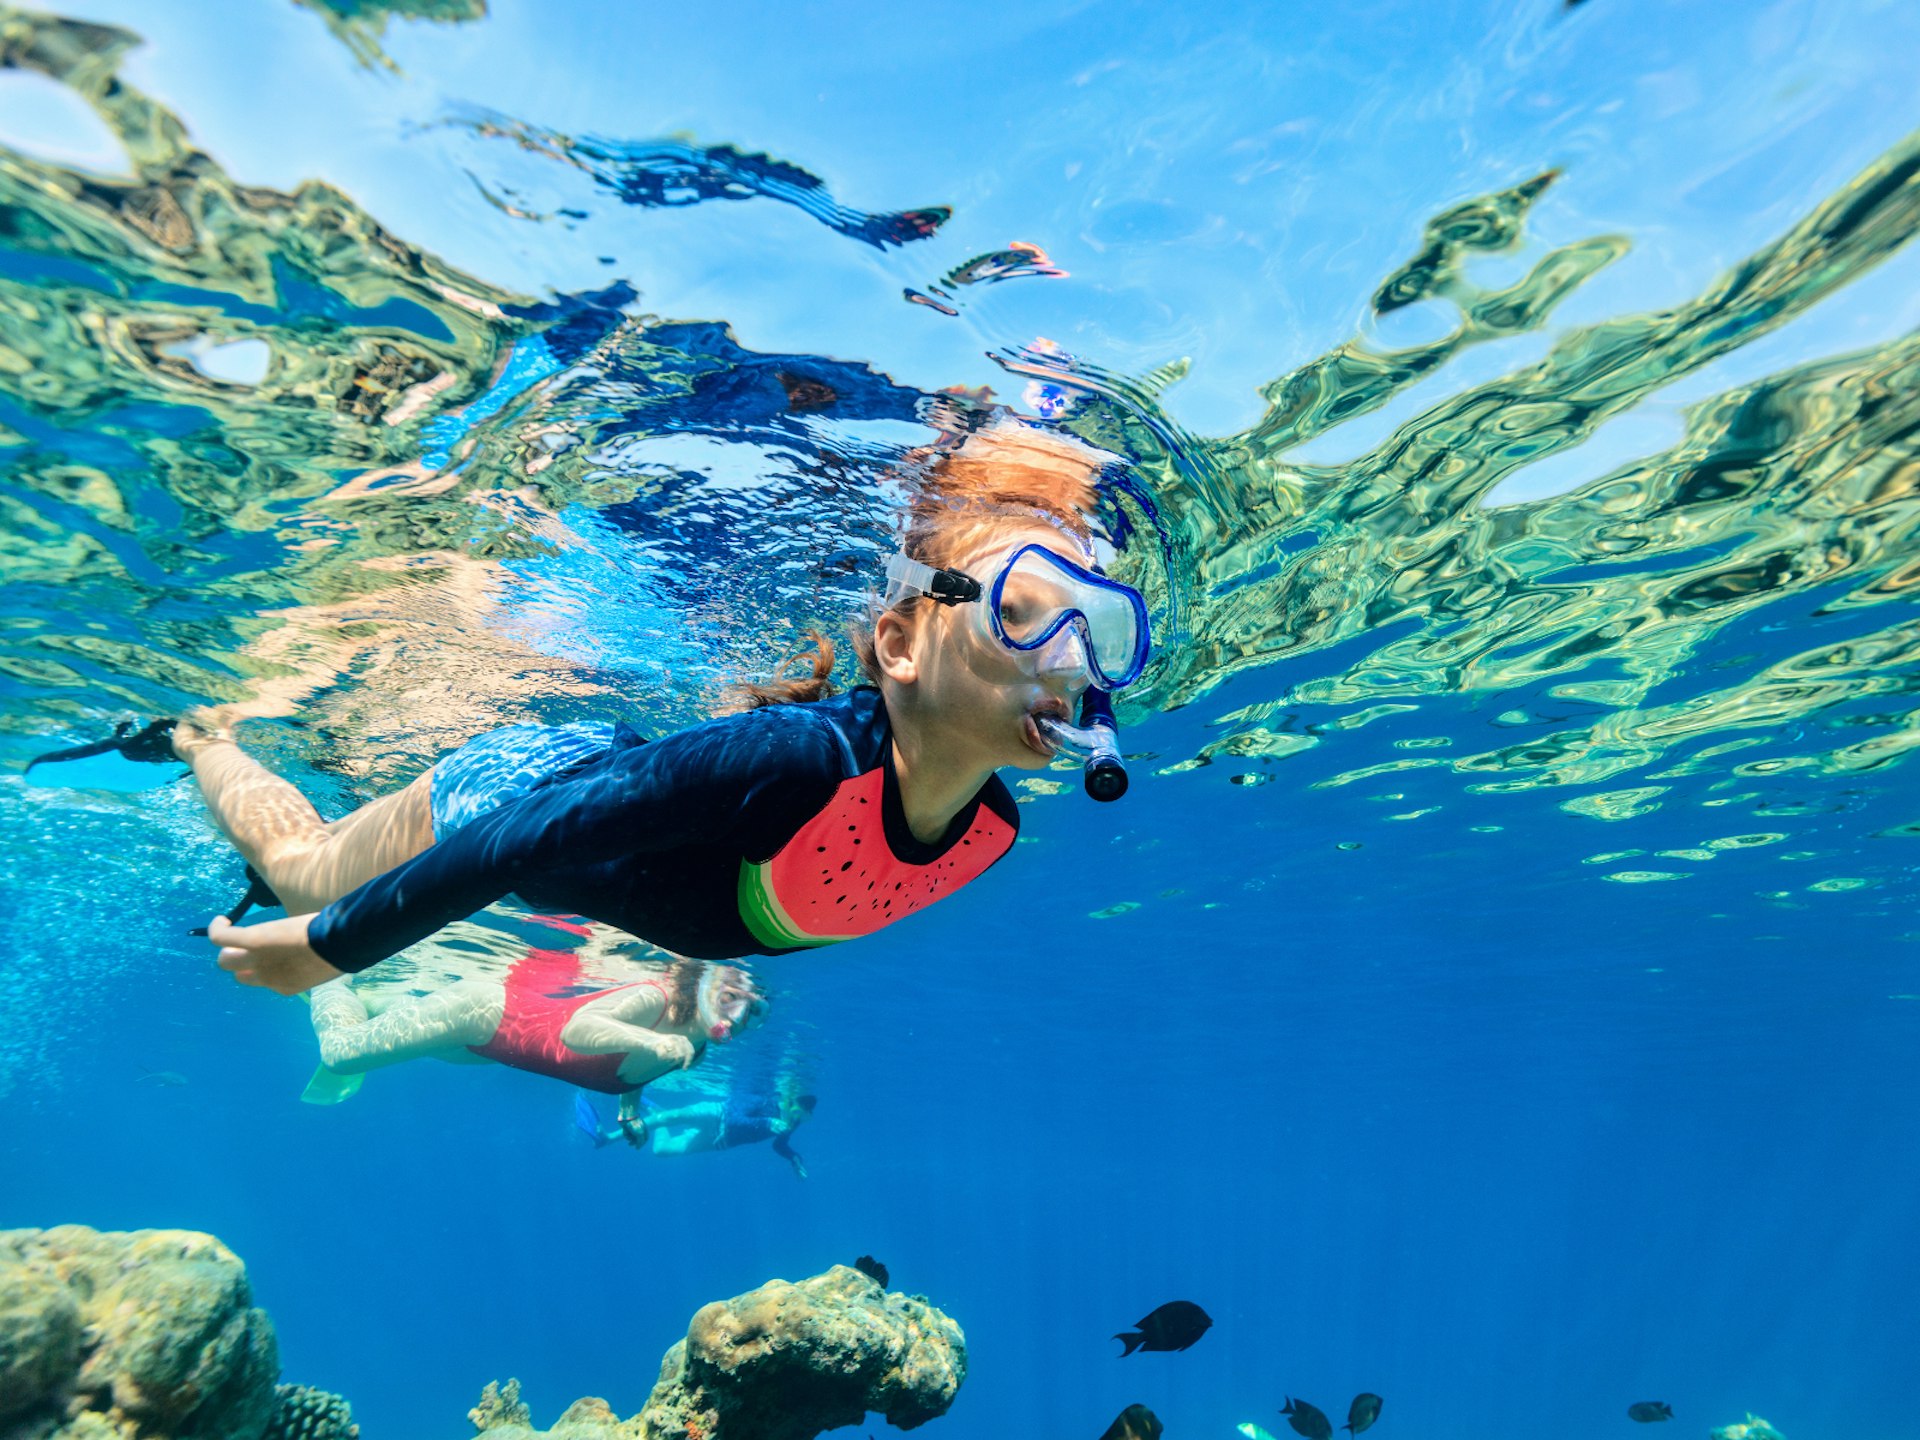 Children snorkelling through very clear blue water with some fish in the background